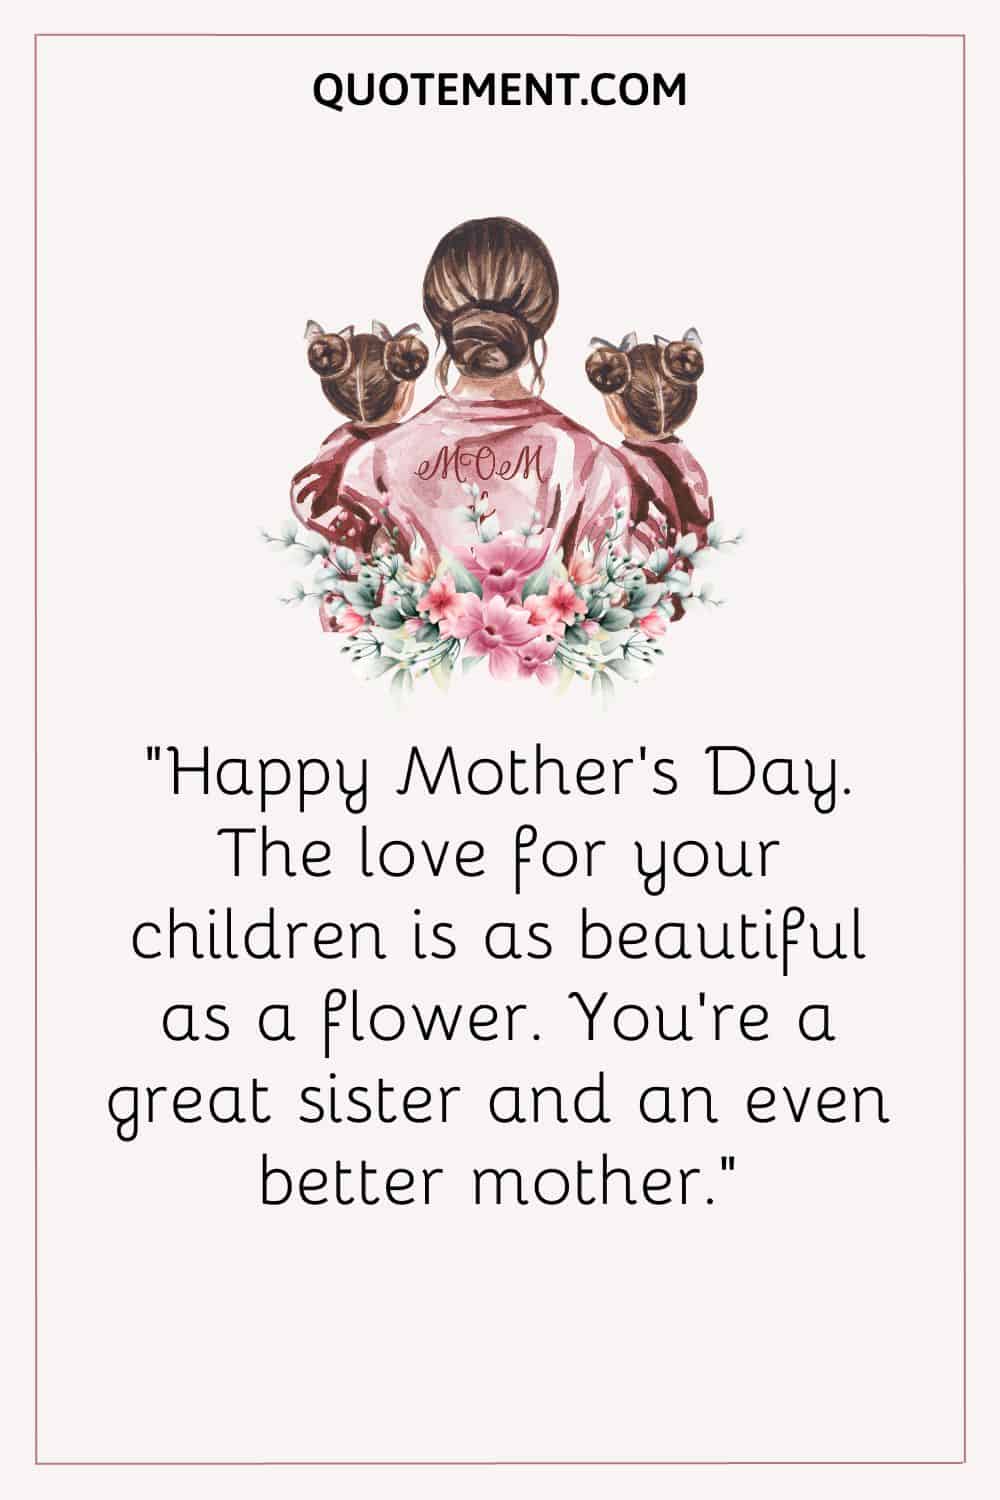 Happy Mother’s Day. The love for your children is as beautiful as a flower. You’re a great sister and an even better mother